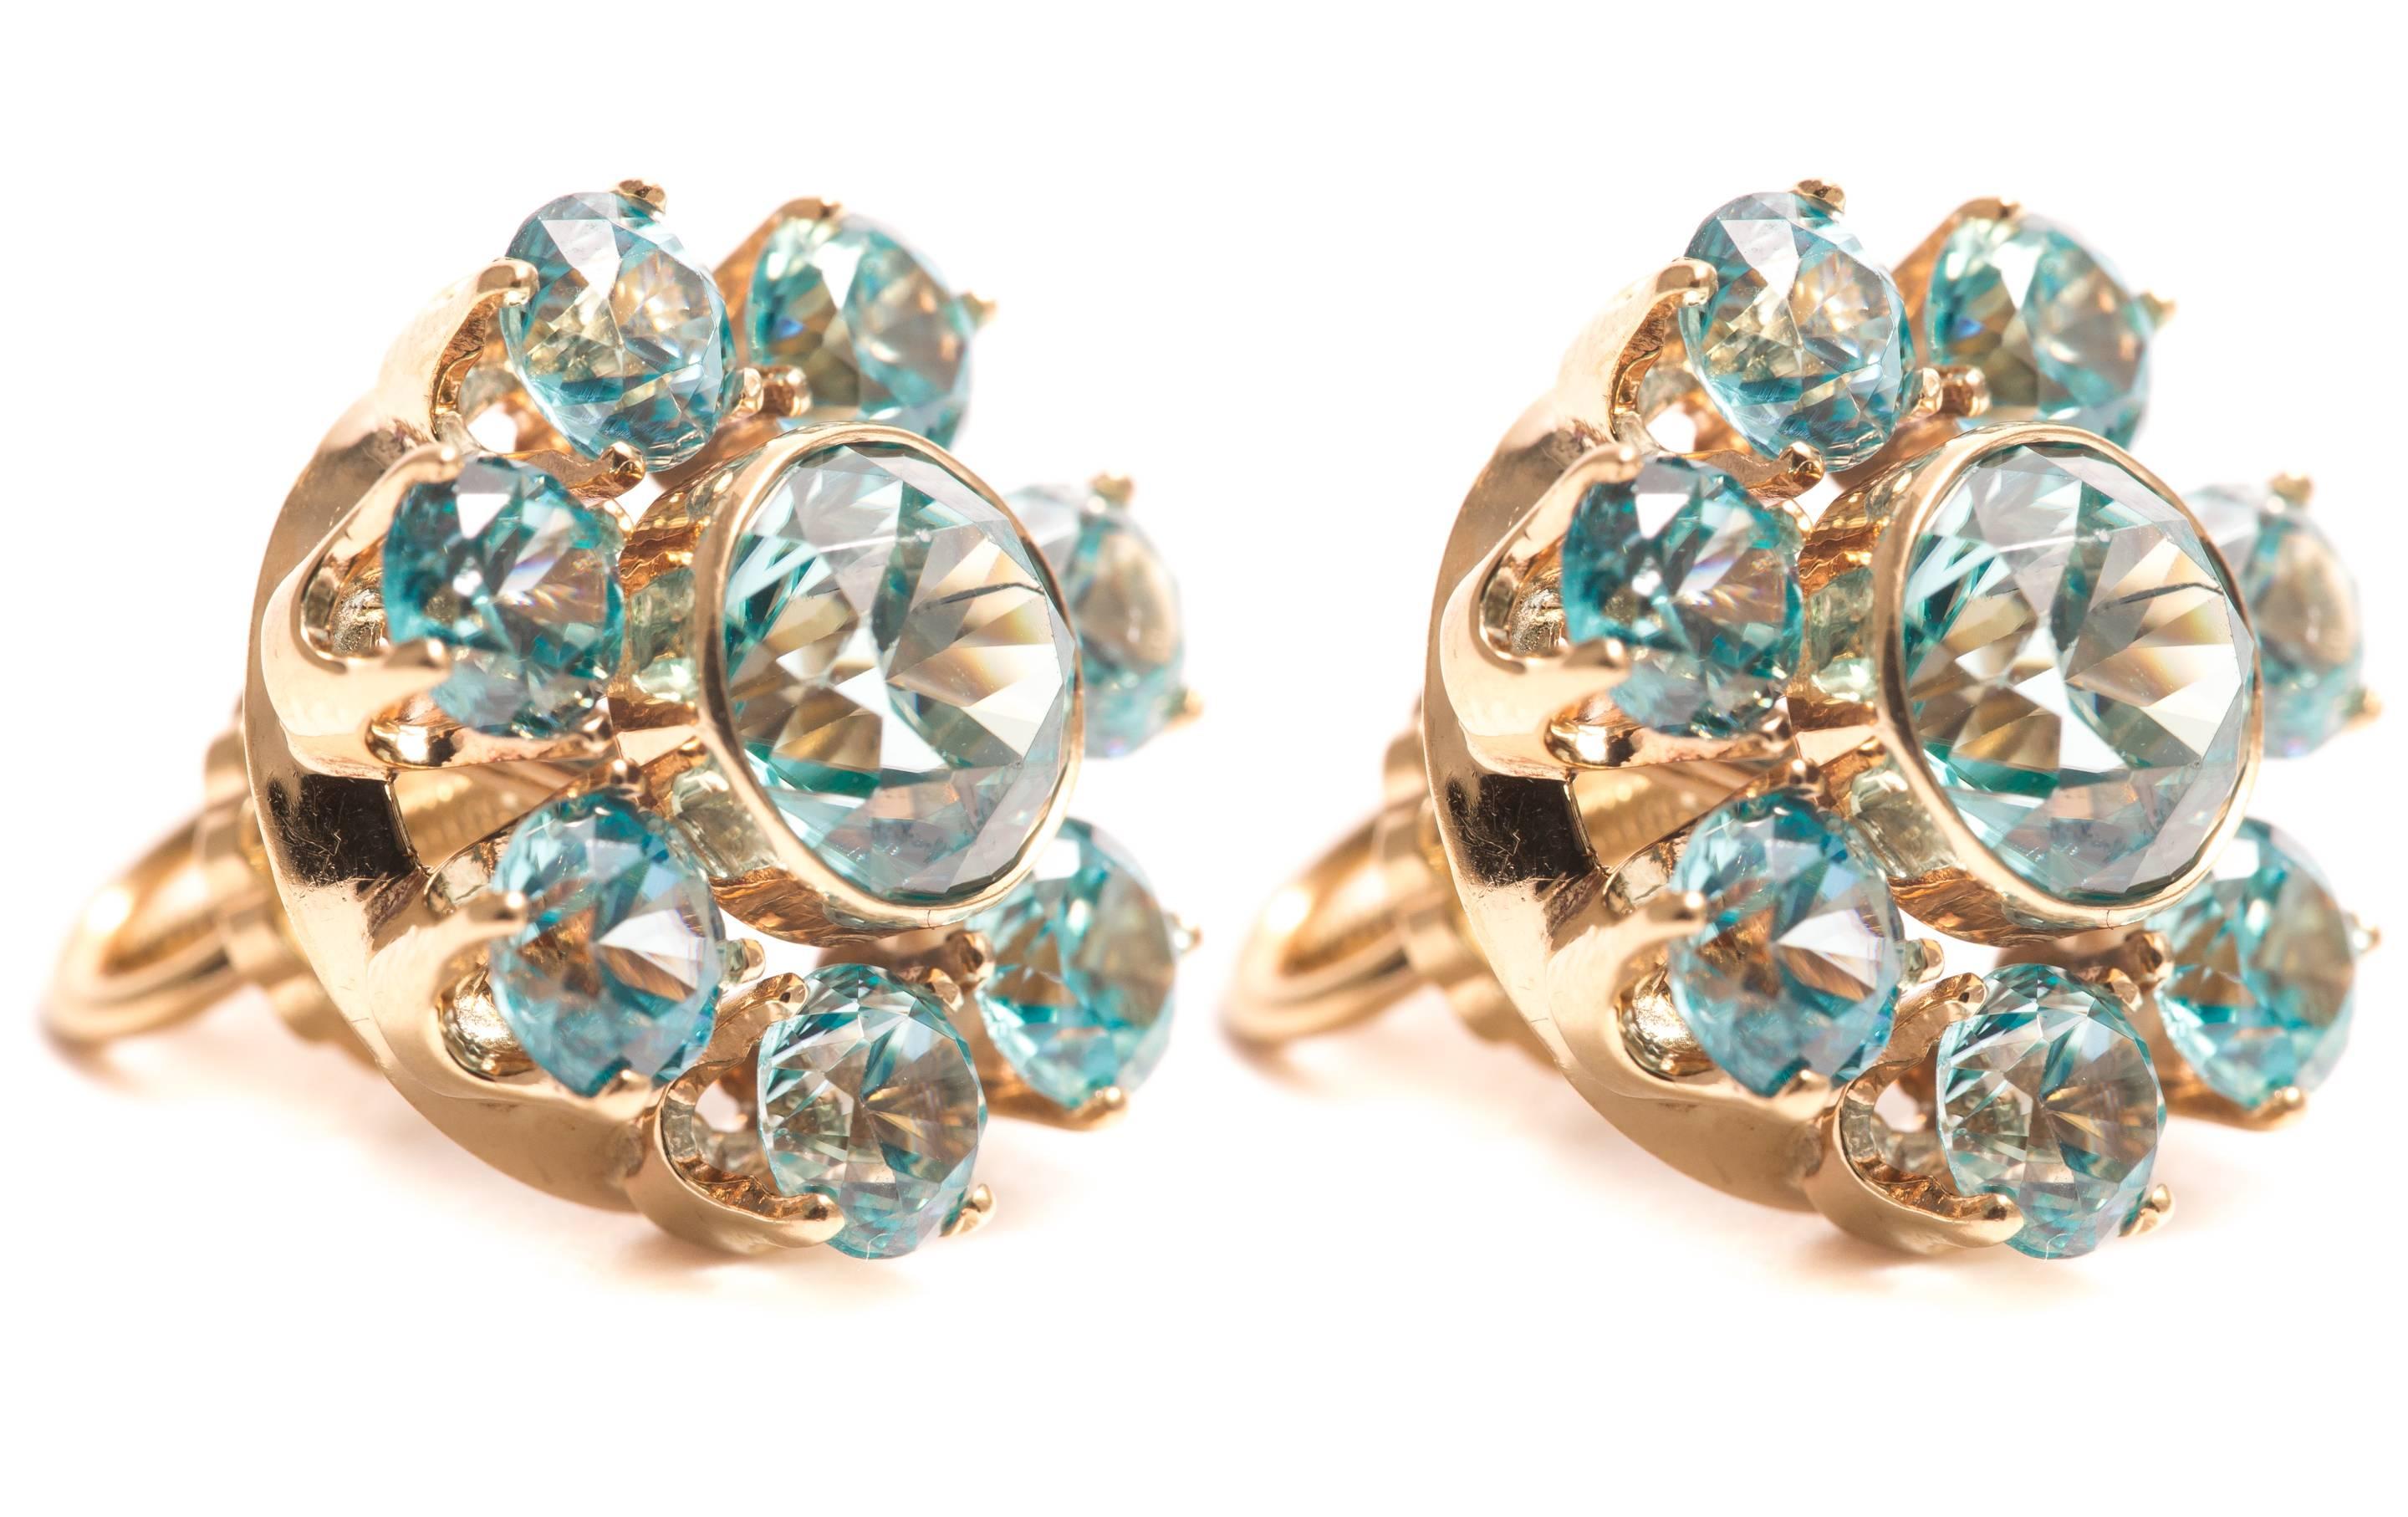 Beacon Hill Jewelers Presents:

A beautiful pair of blue zircon halo form earrings in 14 karat yellow gold.  Centered by a bezel set European cut blue zircon these earrings feature halos of seven prong set zircons.  Grading as beautiful VS clarity